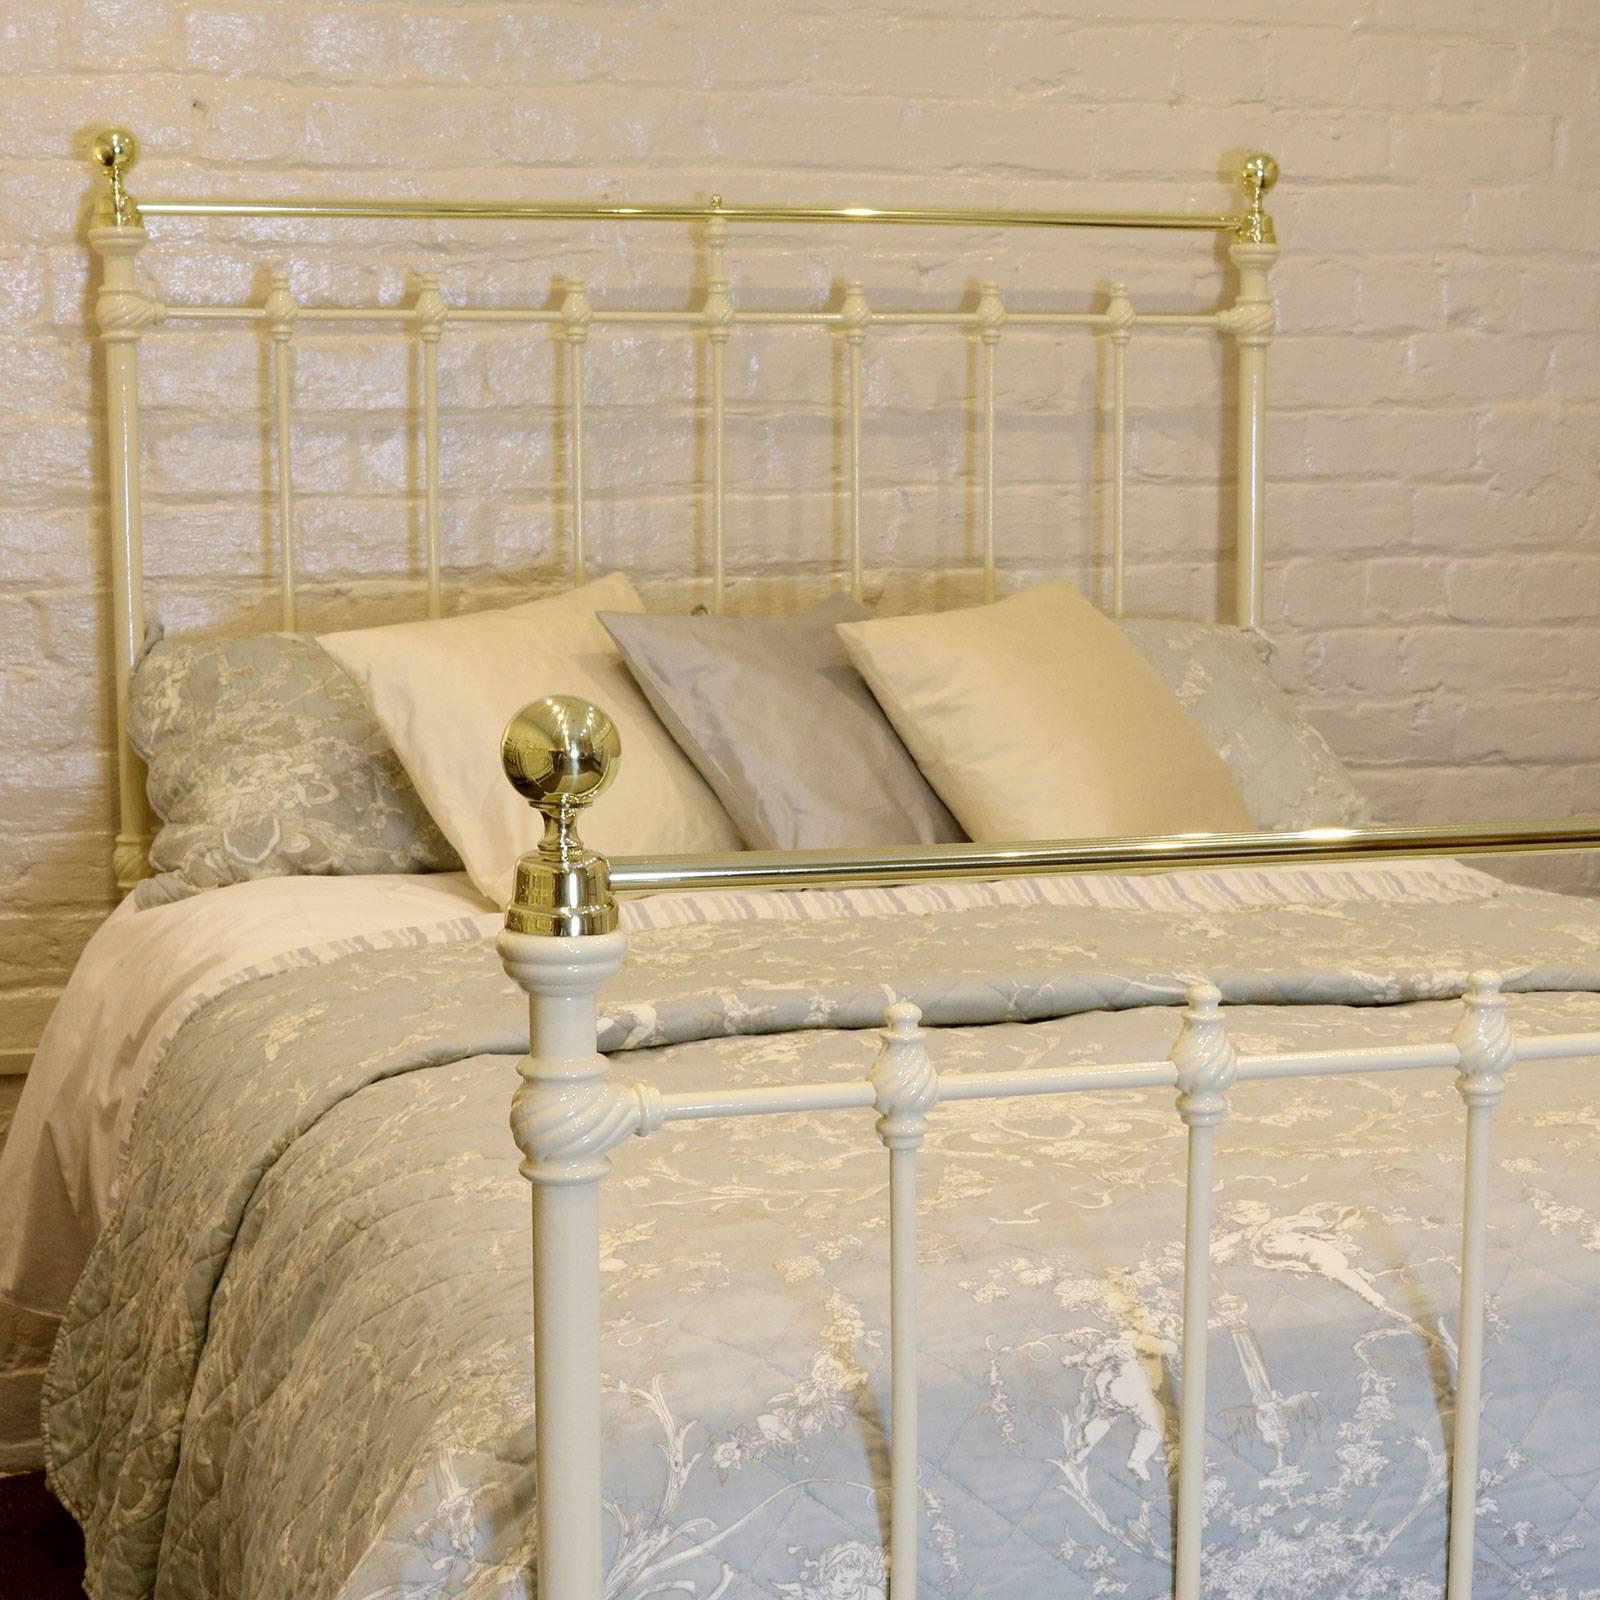 A Victorian brass and iron bed finished in cream with decorative barley twist castings, straight brass top rail, cap collars and brass knobs.

This fine example of an antique brass and iron bed accepts a double base and mattress set, 54 inches